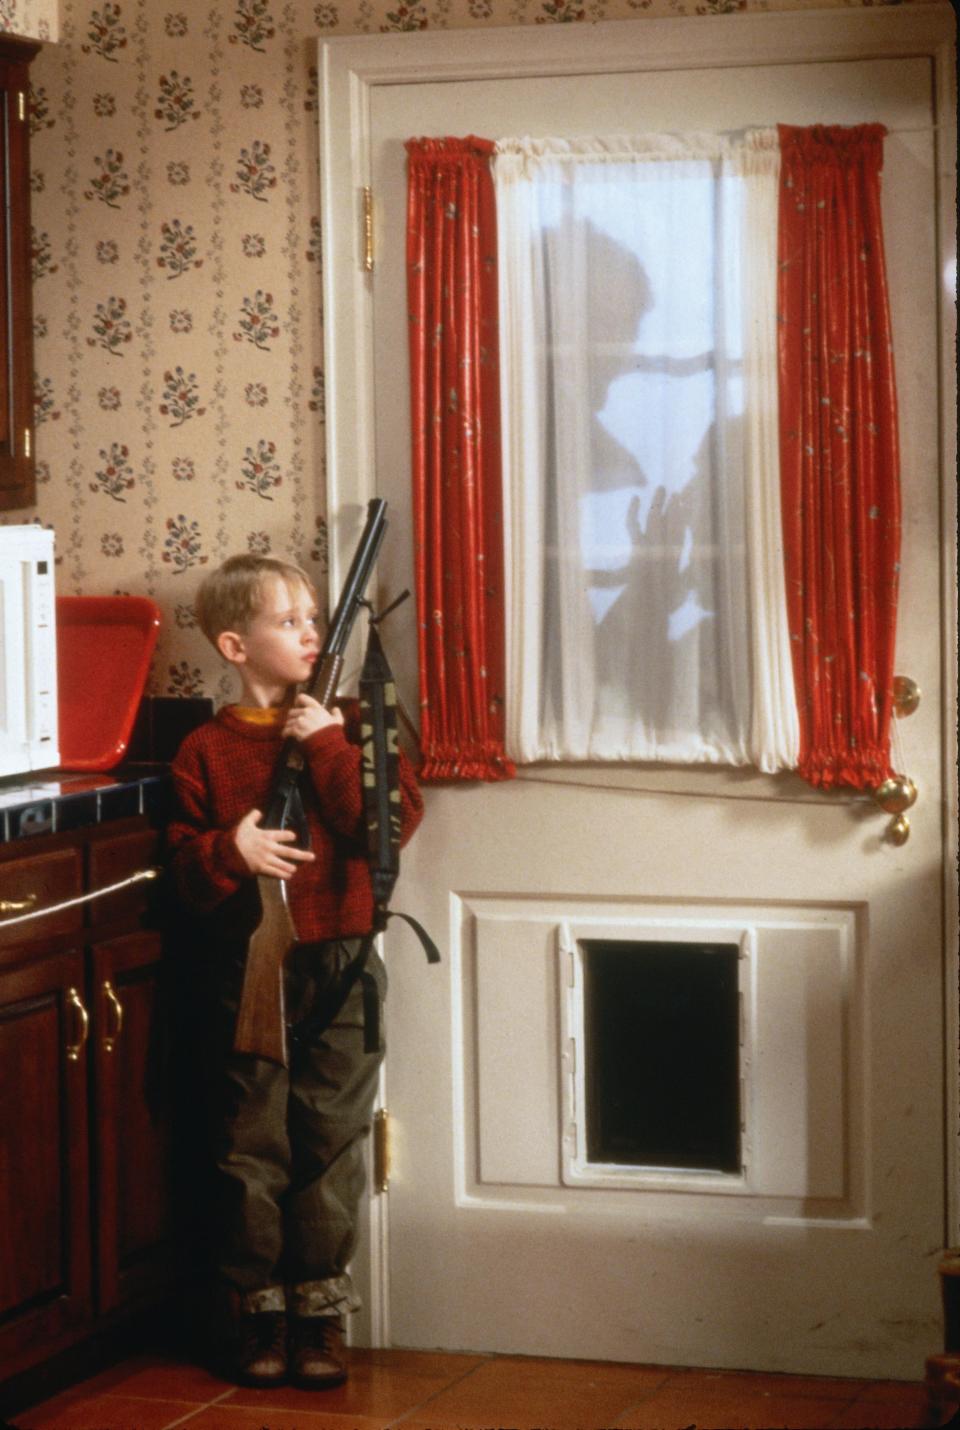 A still from the movie "Home Alone"